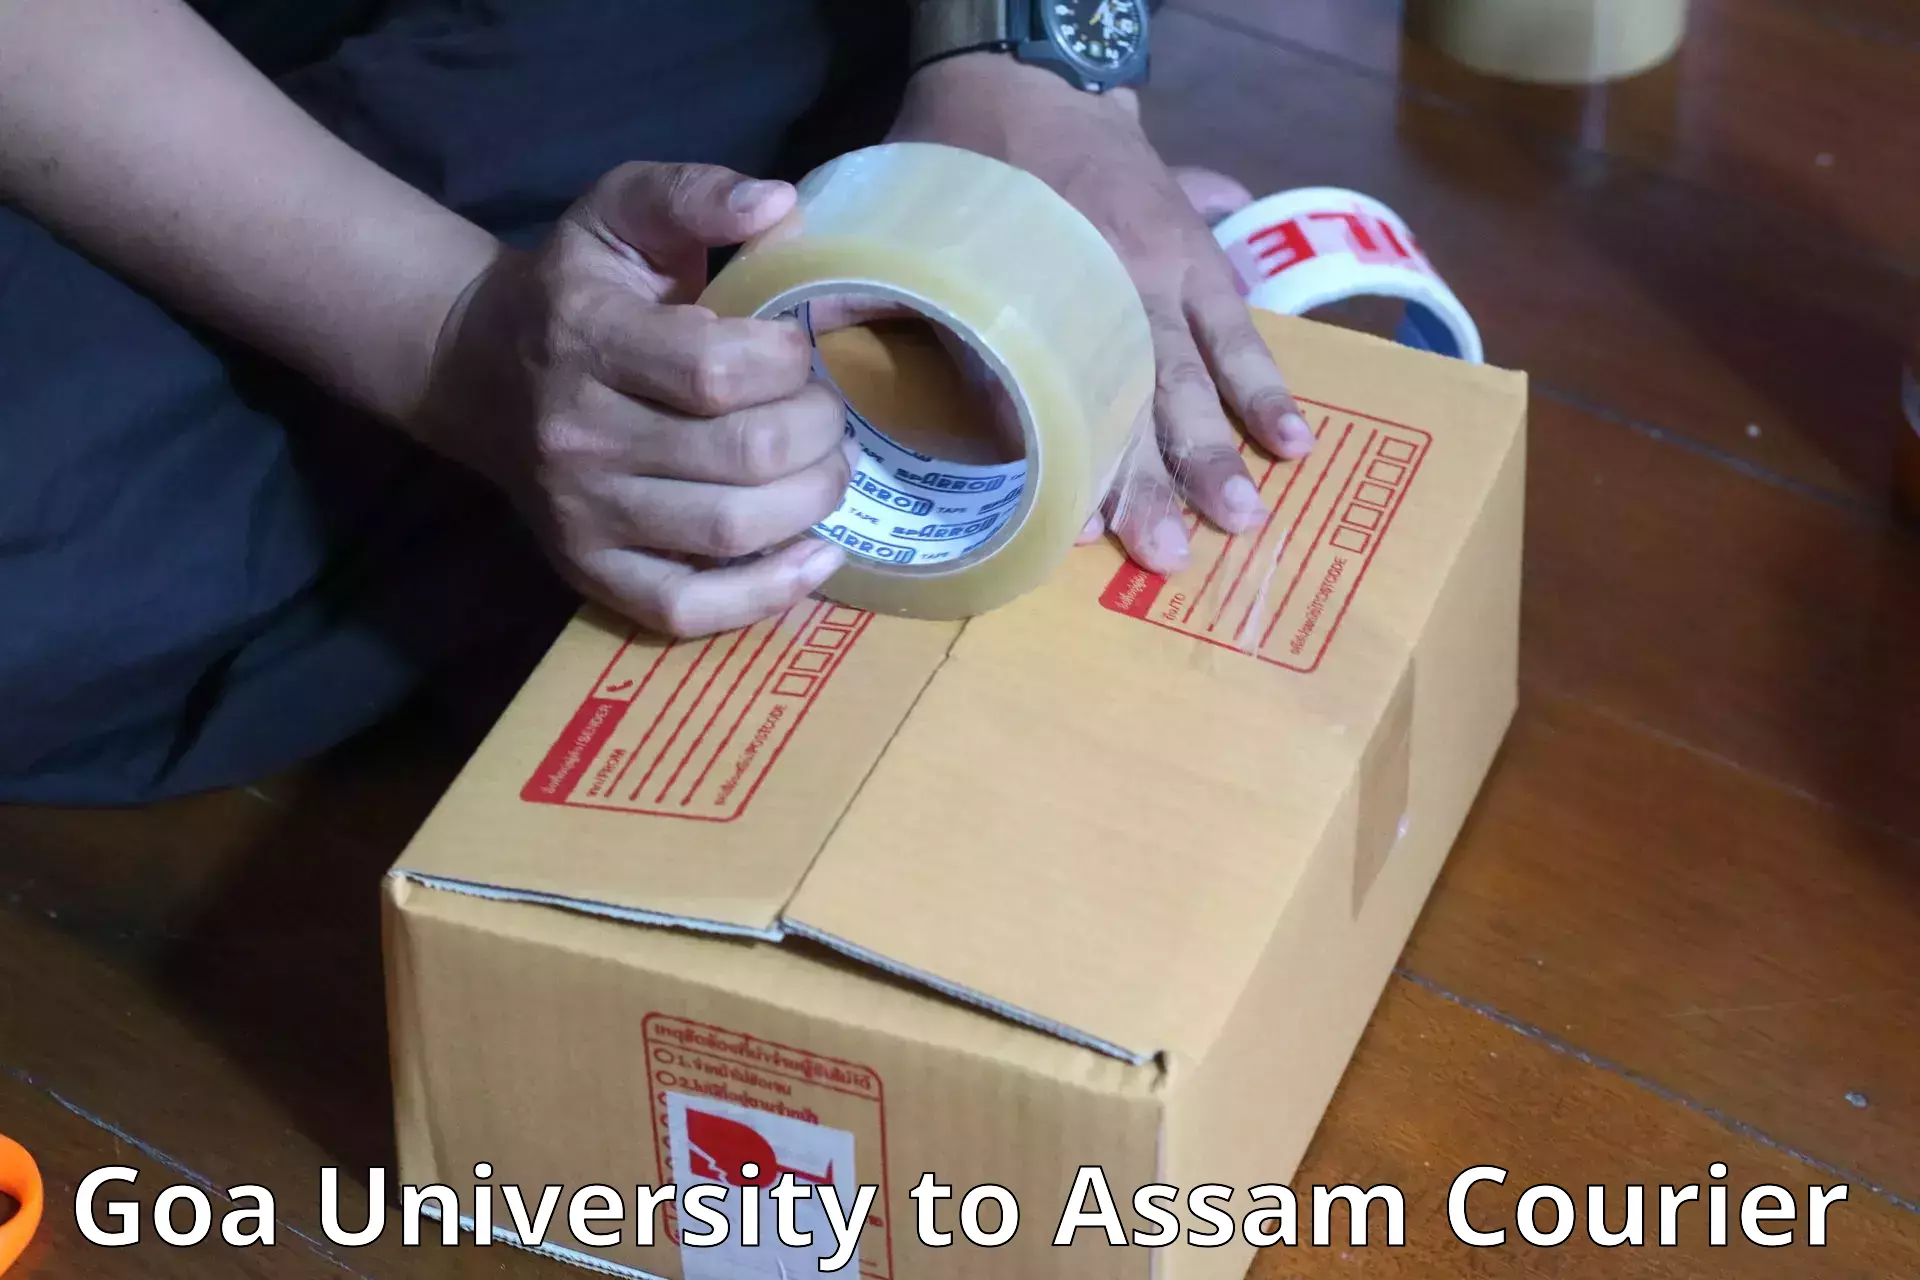 Personal effects shipping in Goa University to Lakhipur